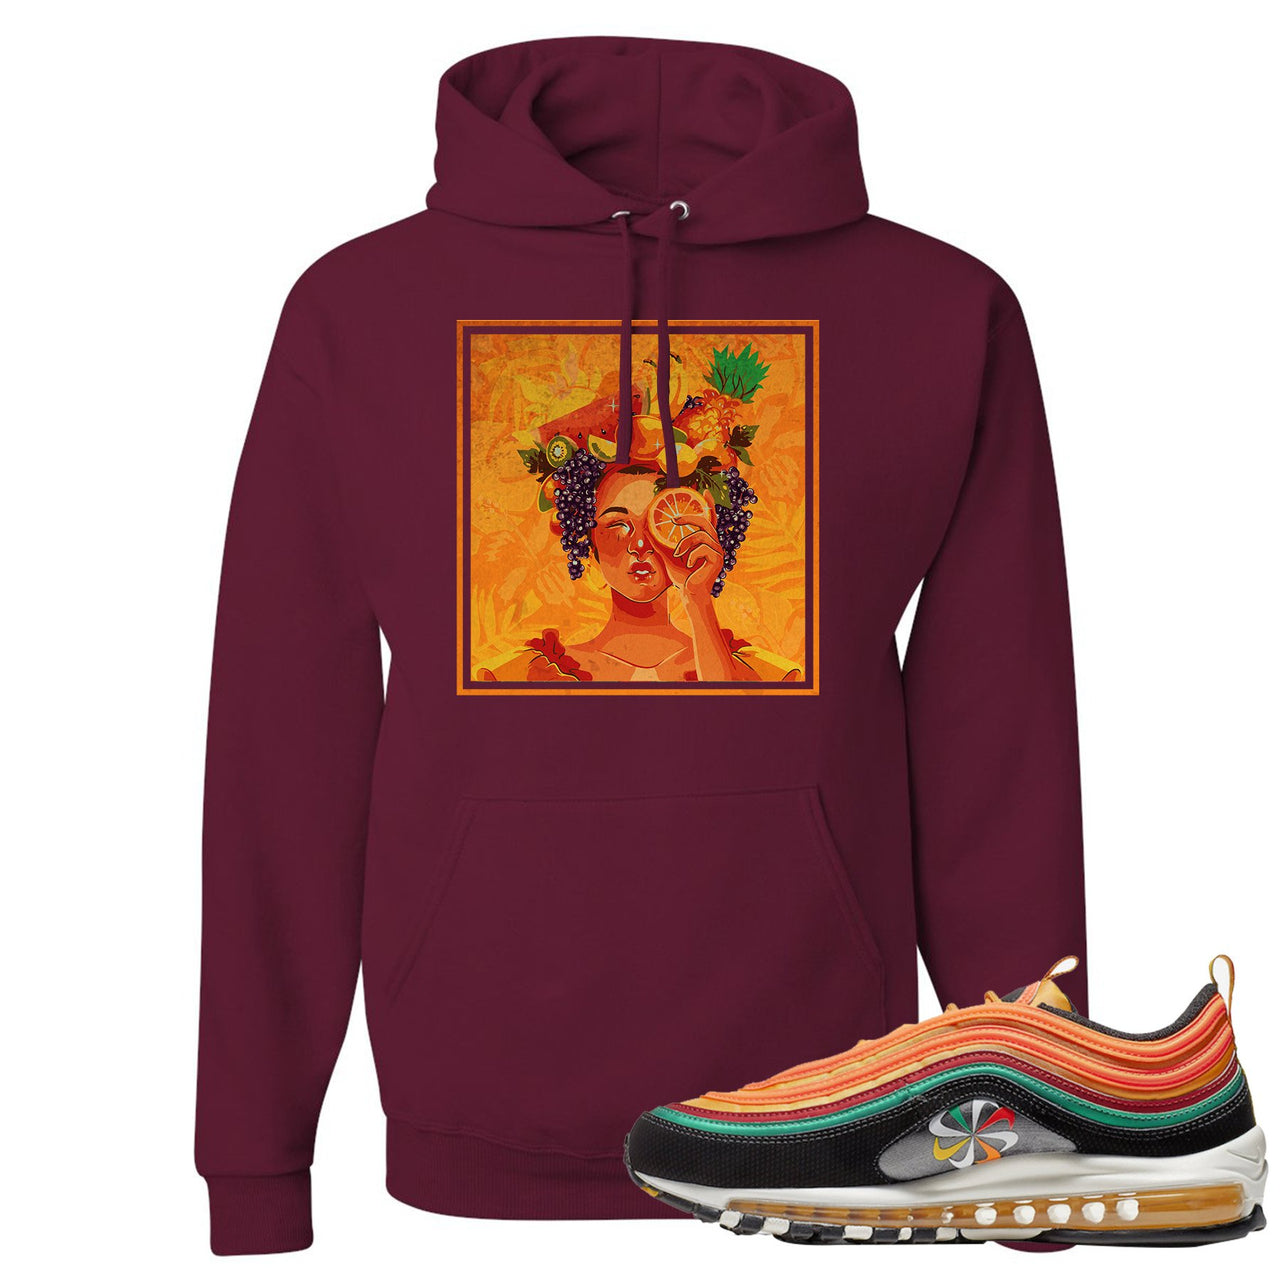 Printed on the front of the Air Max 97 Sunburst maroon sneaker matching pullover hoodie is the Lady fruit logo